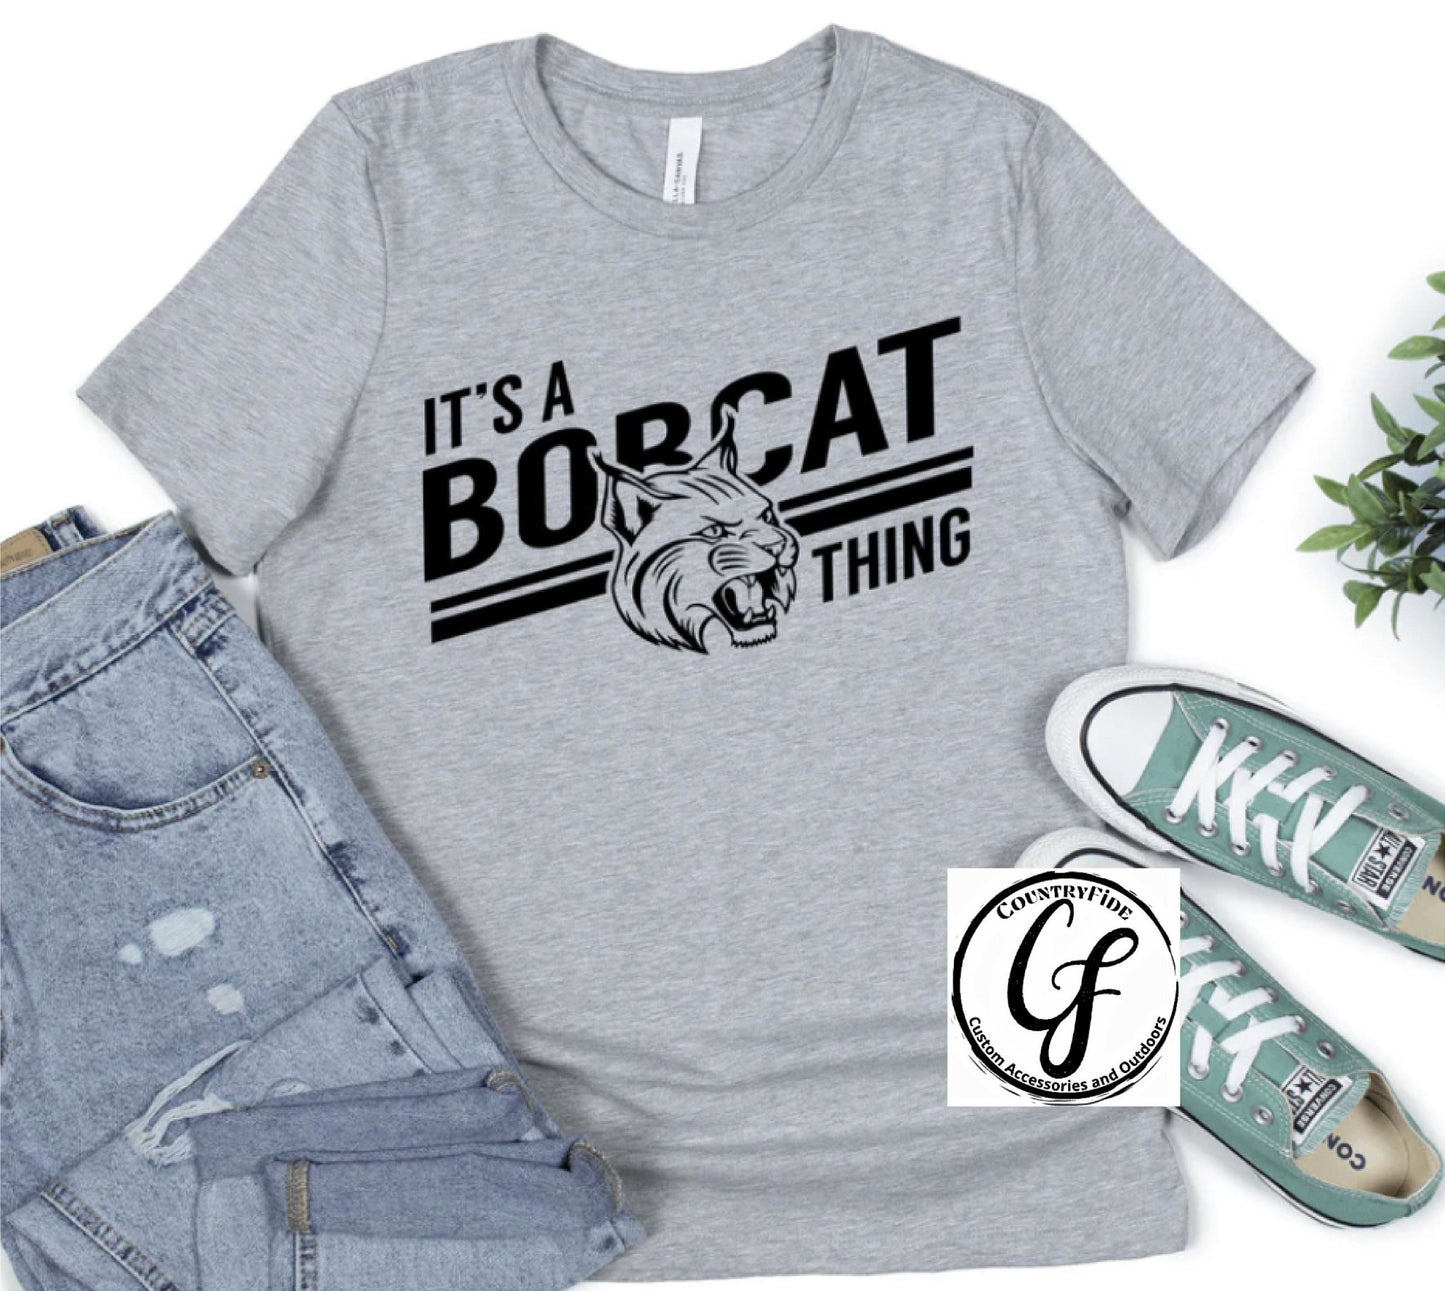 BOBCAT THING - CountryFide Custom Accessories and Outdoors